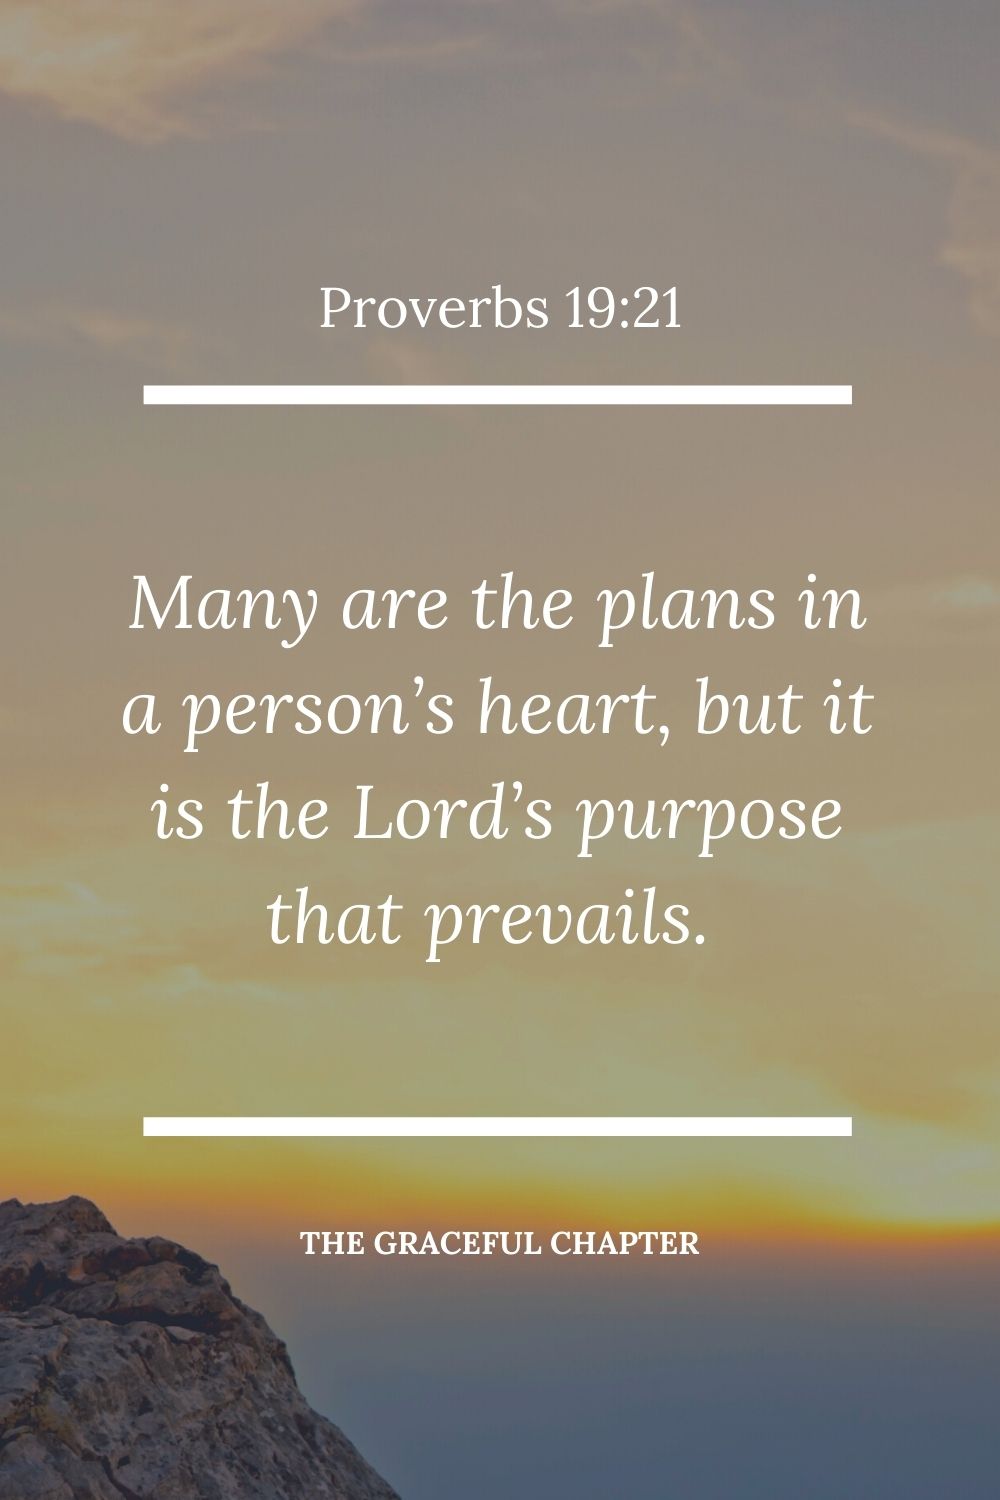 Many are the plans in a person’s heart, but it is the Lord’s purpose that prevails. Proverbs 19:21